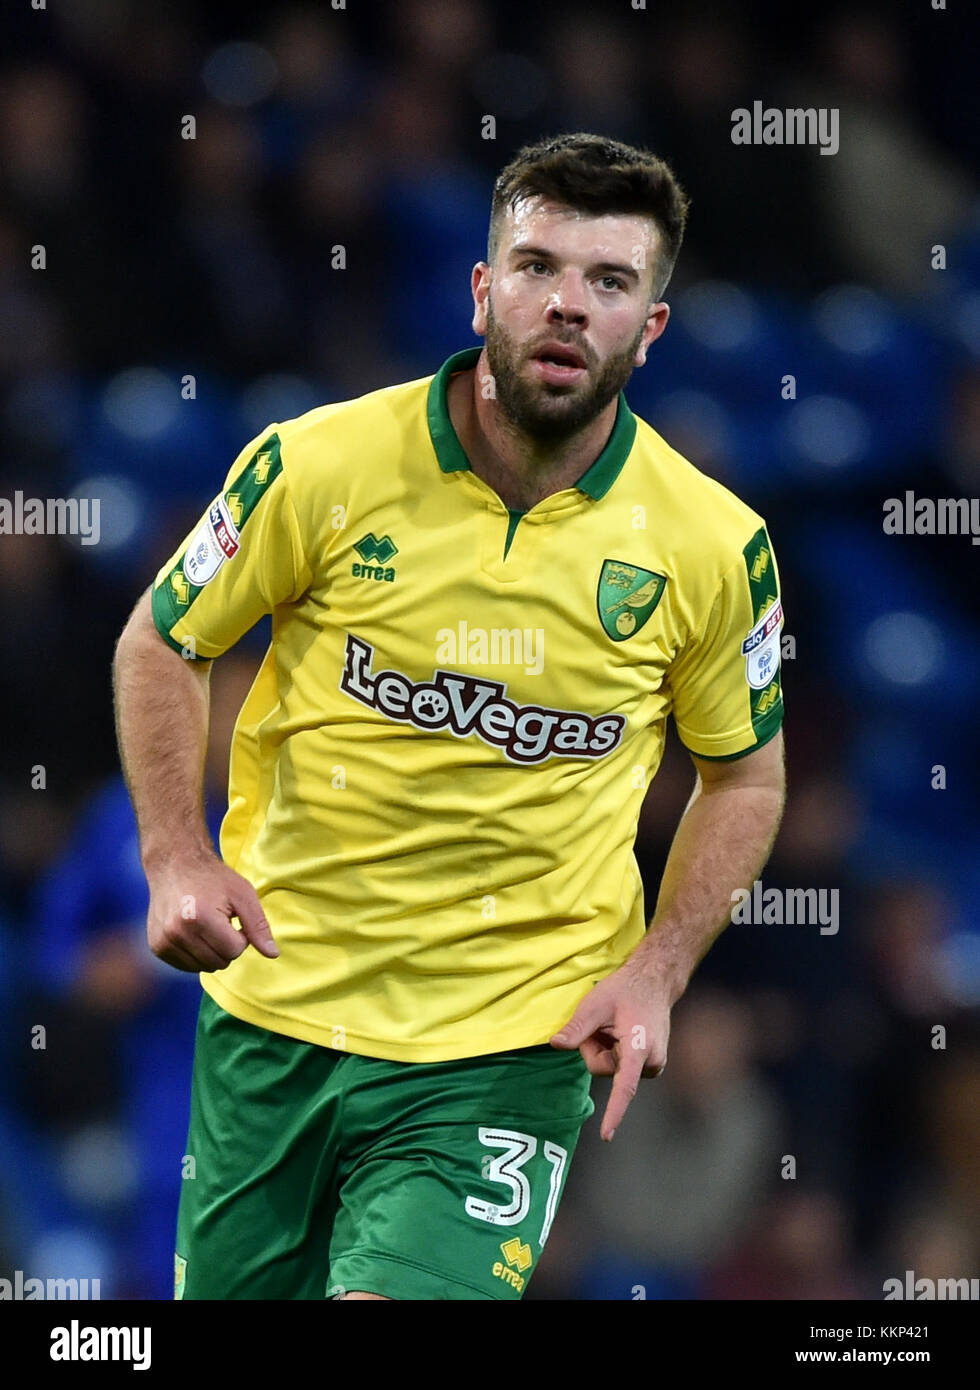 Norwich City's Grant Hanley during the Sky Bet Championship match at the Cardiff City Stadium, Cardiff. PRESS ASSOCIATION Photo Picture date: Friday December 1, 2017. See PA story SOCCER Cardiff. Photo credit should read: Simon Galloway/PA Wire. RESTICTIONS: EDITORIAL USE ONLY No use with unauthorised audio, video, data, fixture lists, club/league logos or 'live' services. Online in-match use limited to 75 images, no video emulation. No use in betting, games or single club/league/player publications. Stock Photo